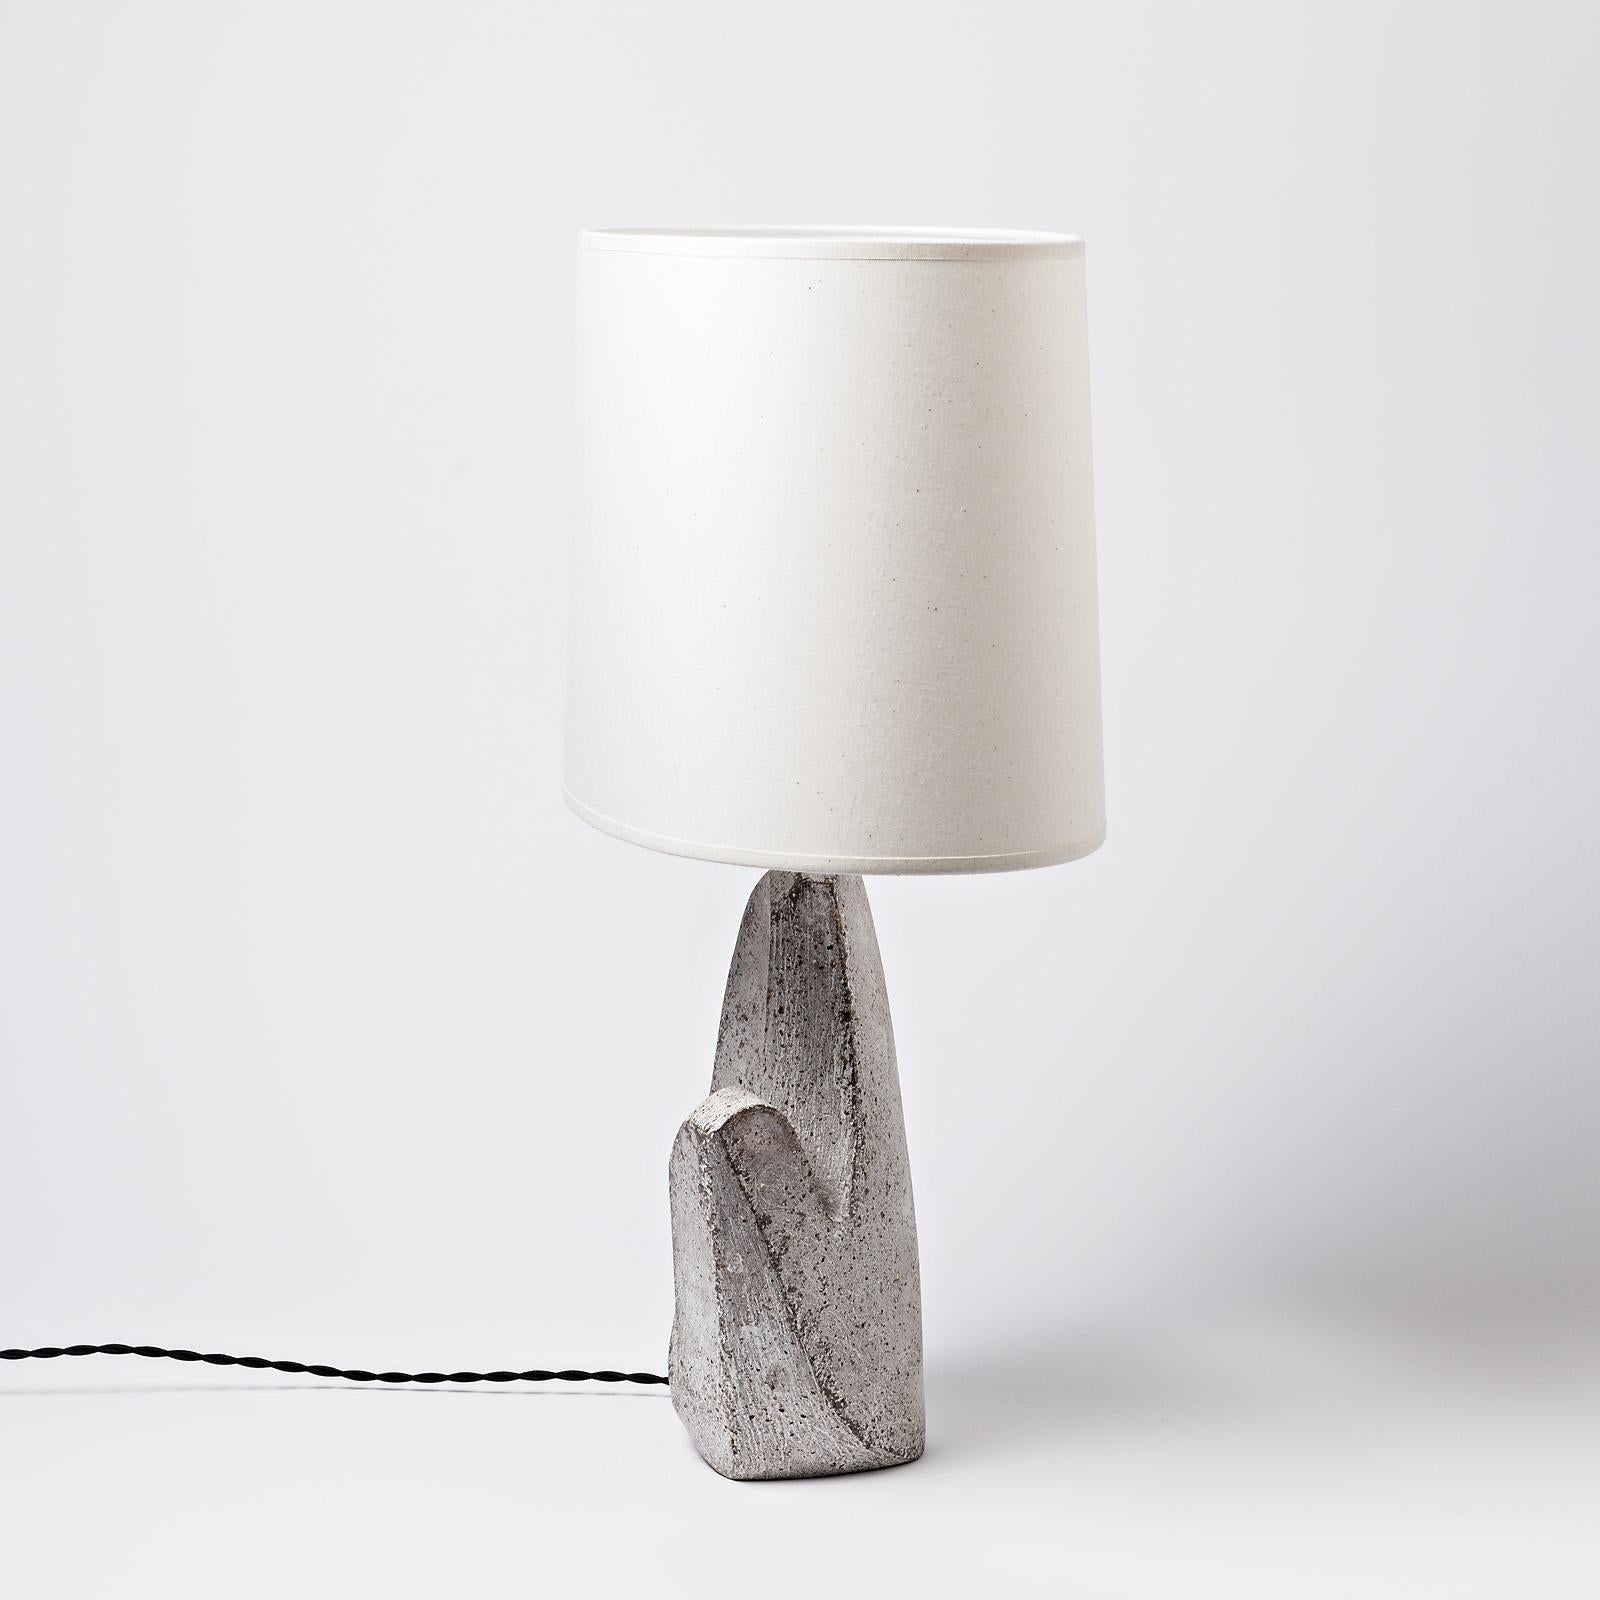 Beaux Arts Ceramic Table Lamp by Maarten Stuer, circa 2021